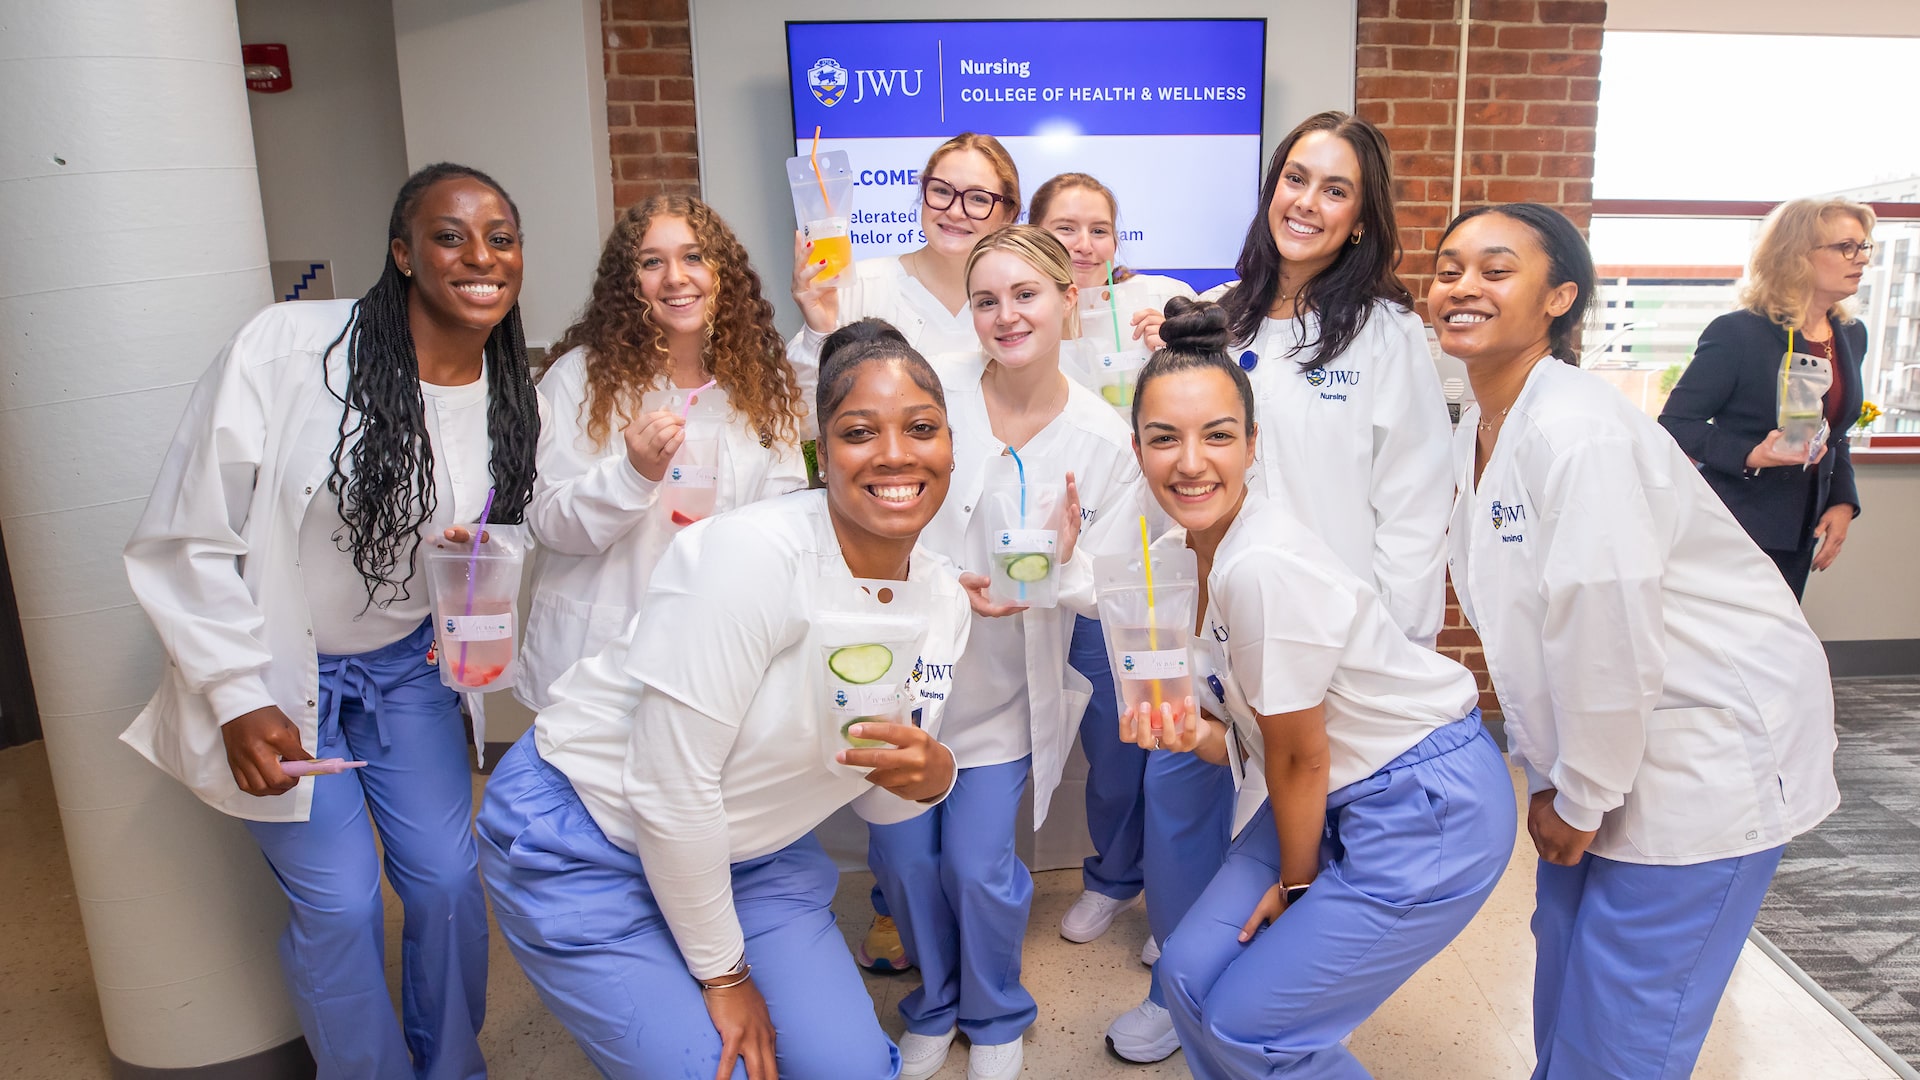 Students from JWU’s first Nursing cohort welcome visitors to the newly-unveiled facility.